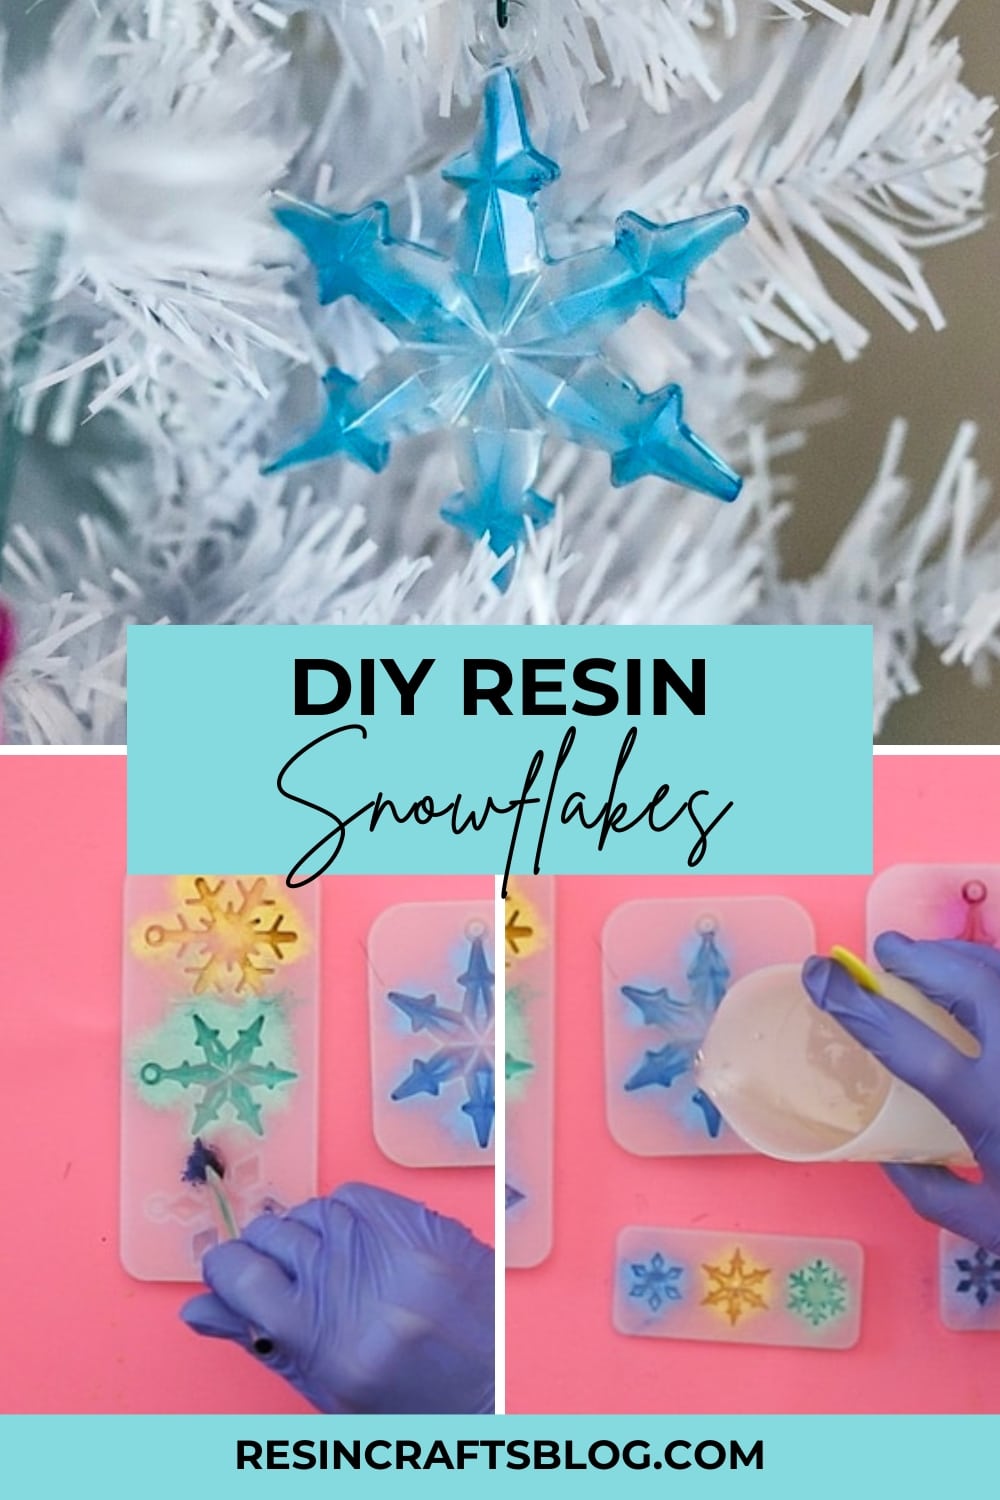 Create beautiful, crystal clear snowflakes with Promise Epoxy and add vibrant pops of color to the tips with Color Creator Mica Powders. #resincrafts #christmascrafts via @resincraftsblog